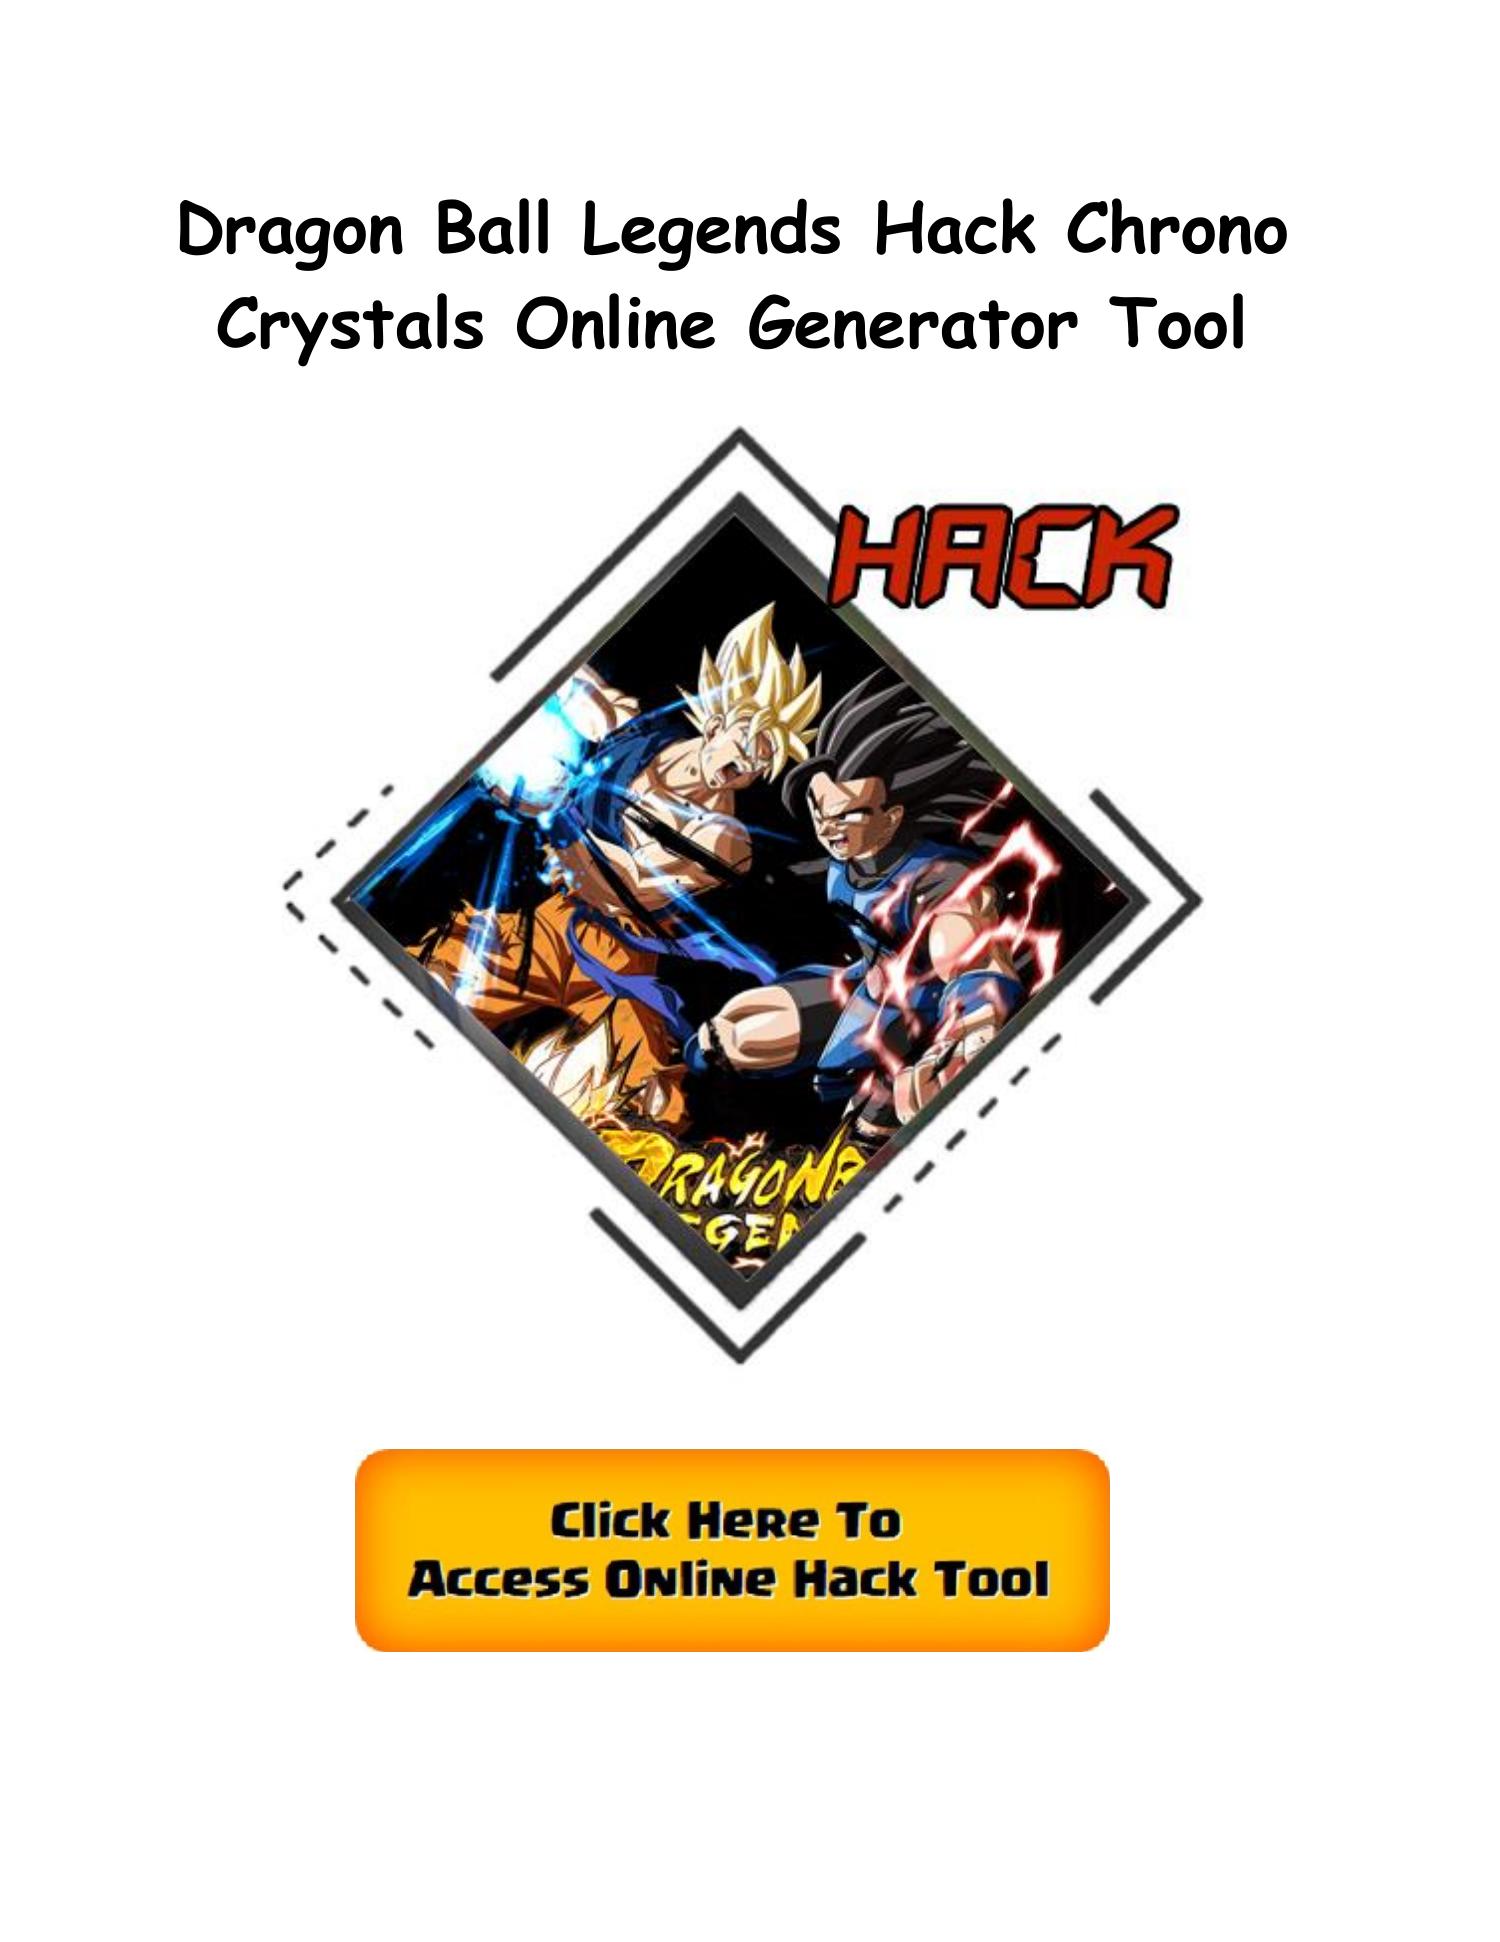 Fast-GENERATOR] How To Get Free Dragon Ball Legends Crystal Generator, 202